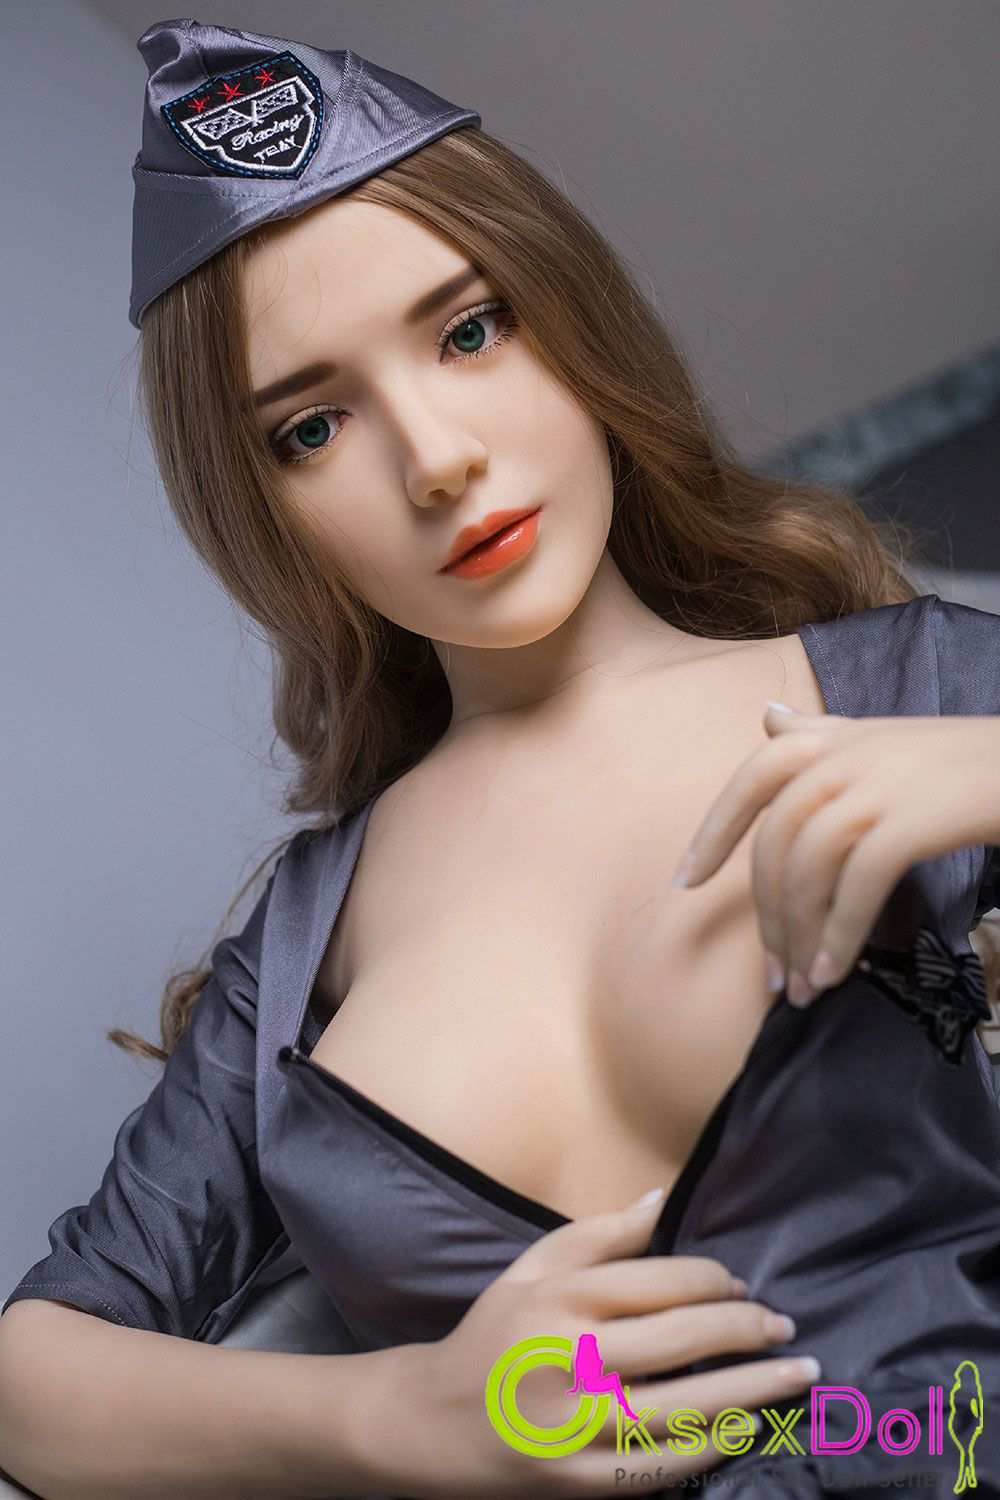 teen rides sex doll Images